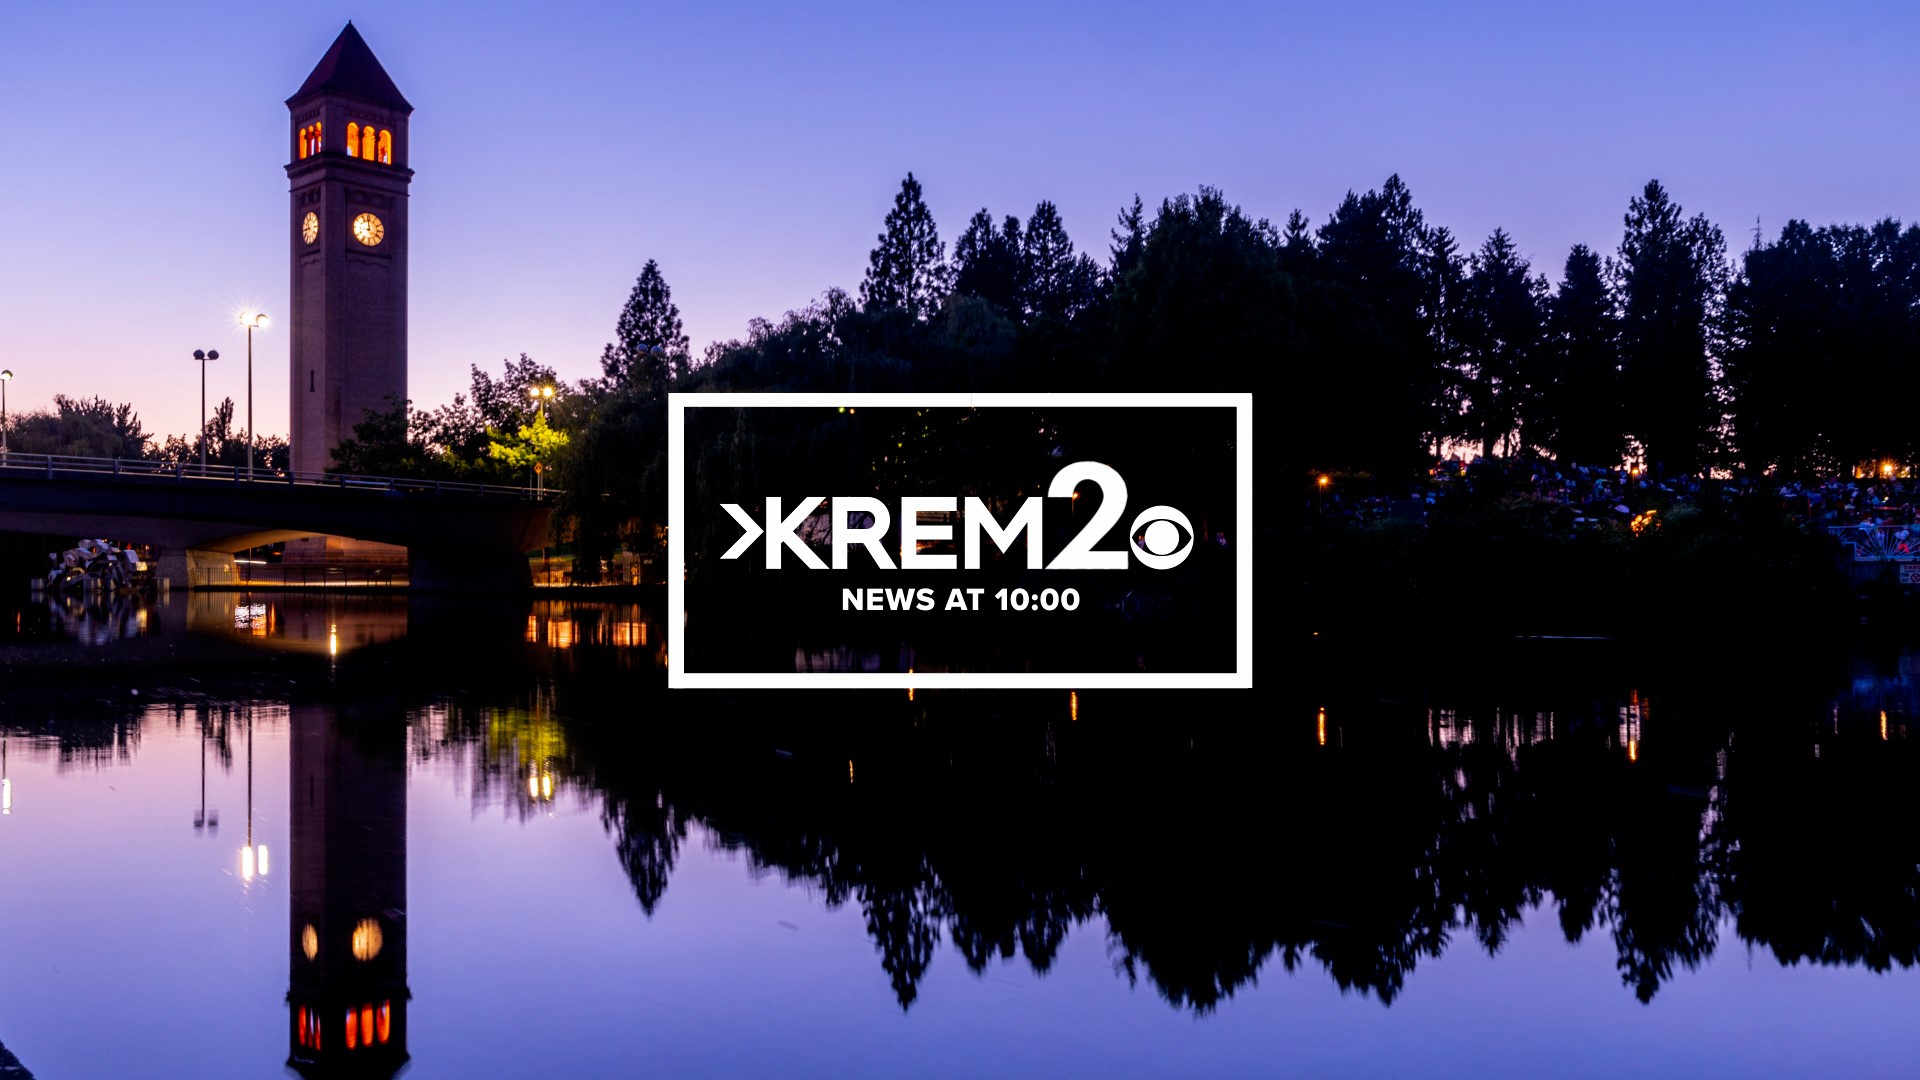 KREM 2 News provides the latest on major news impacting the Inland Northwest, plus weather and sports.